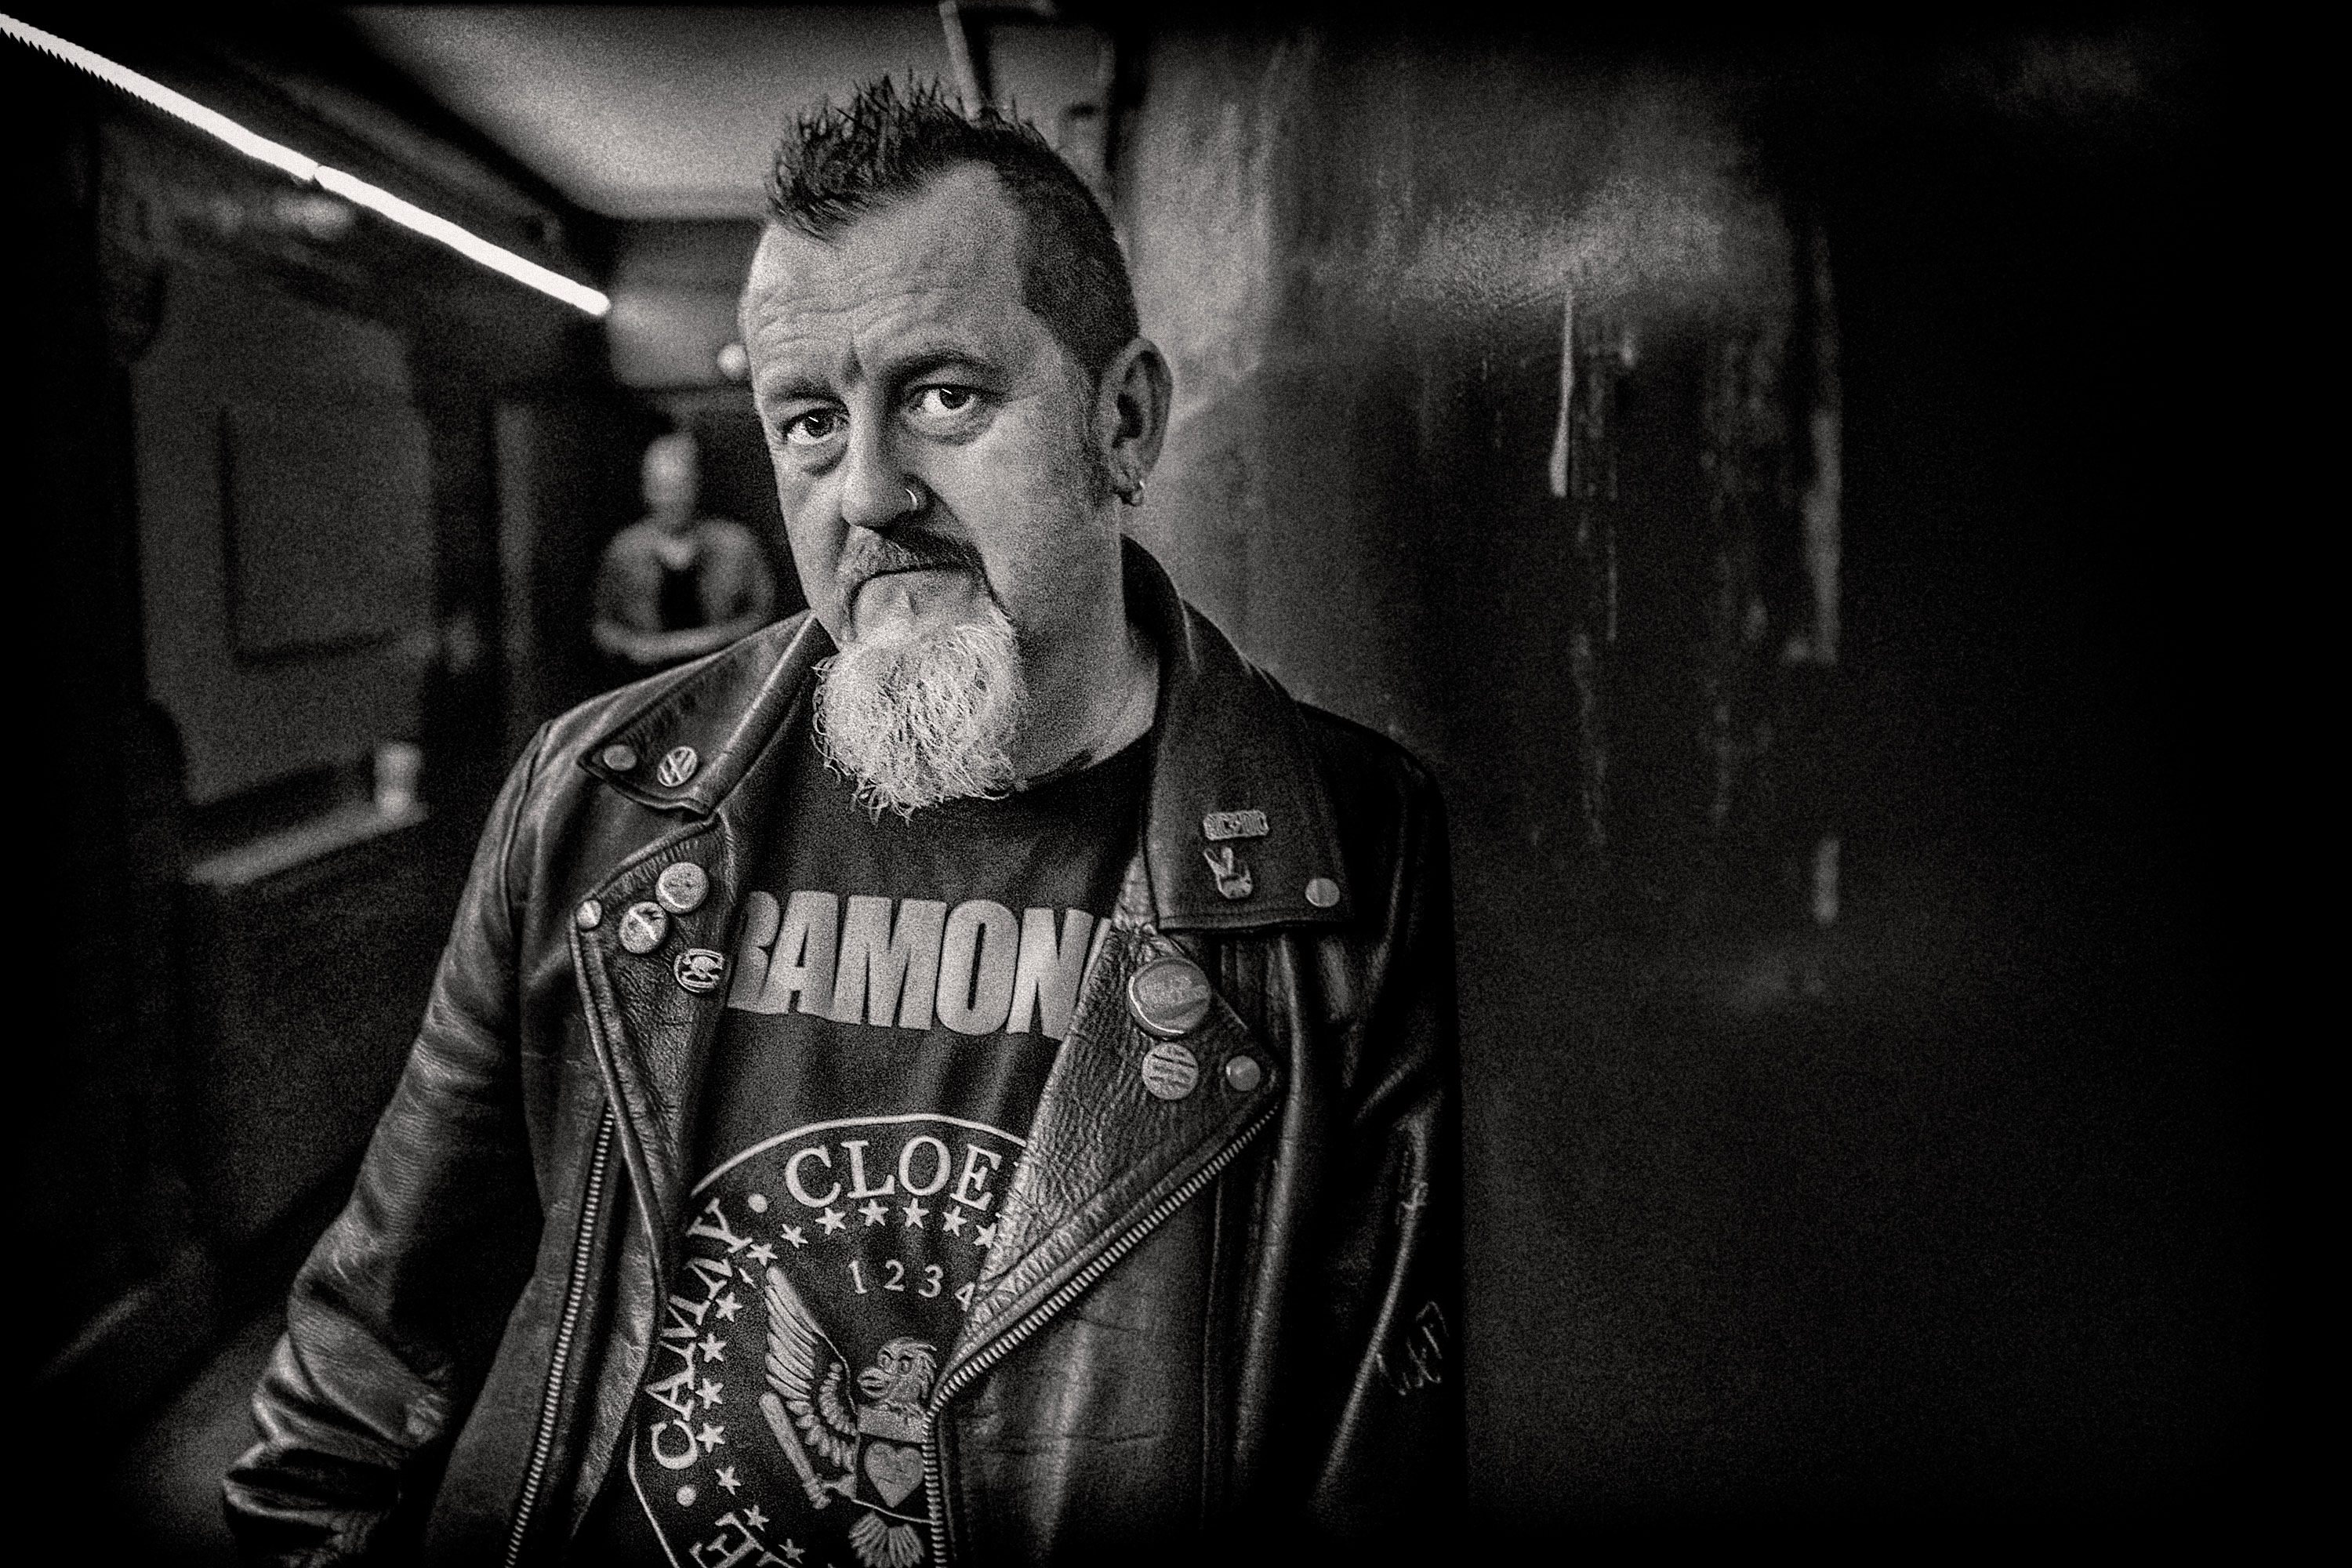 An atmospheric black and white portrait of a man wearing a leather jacket and Ramones t-shirt at a gig